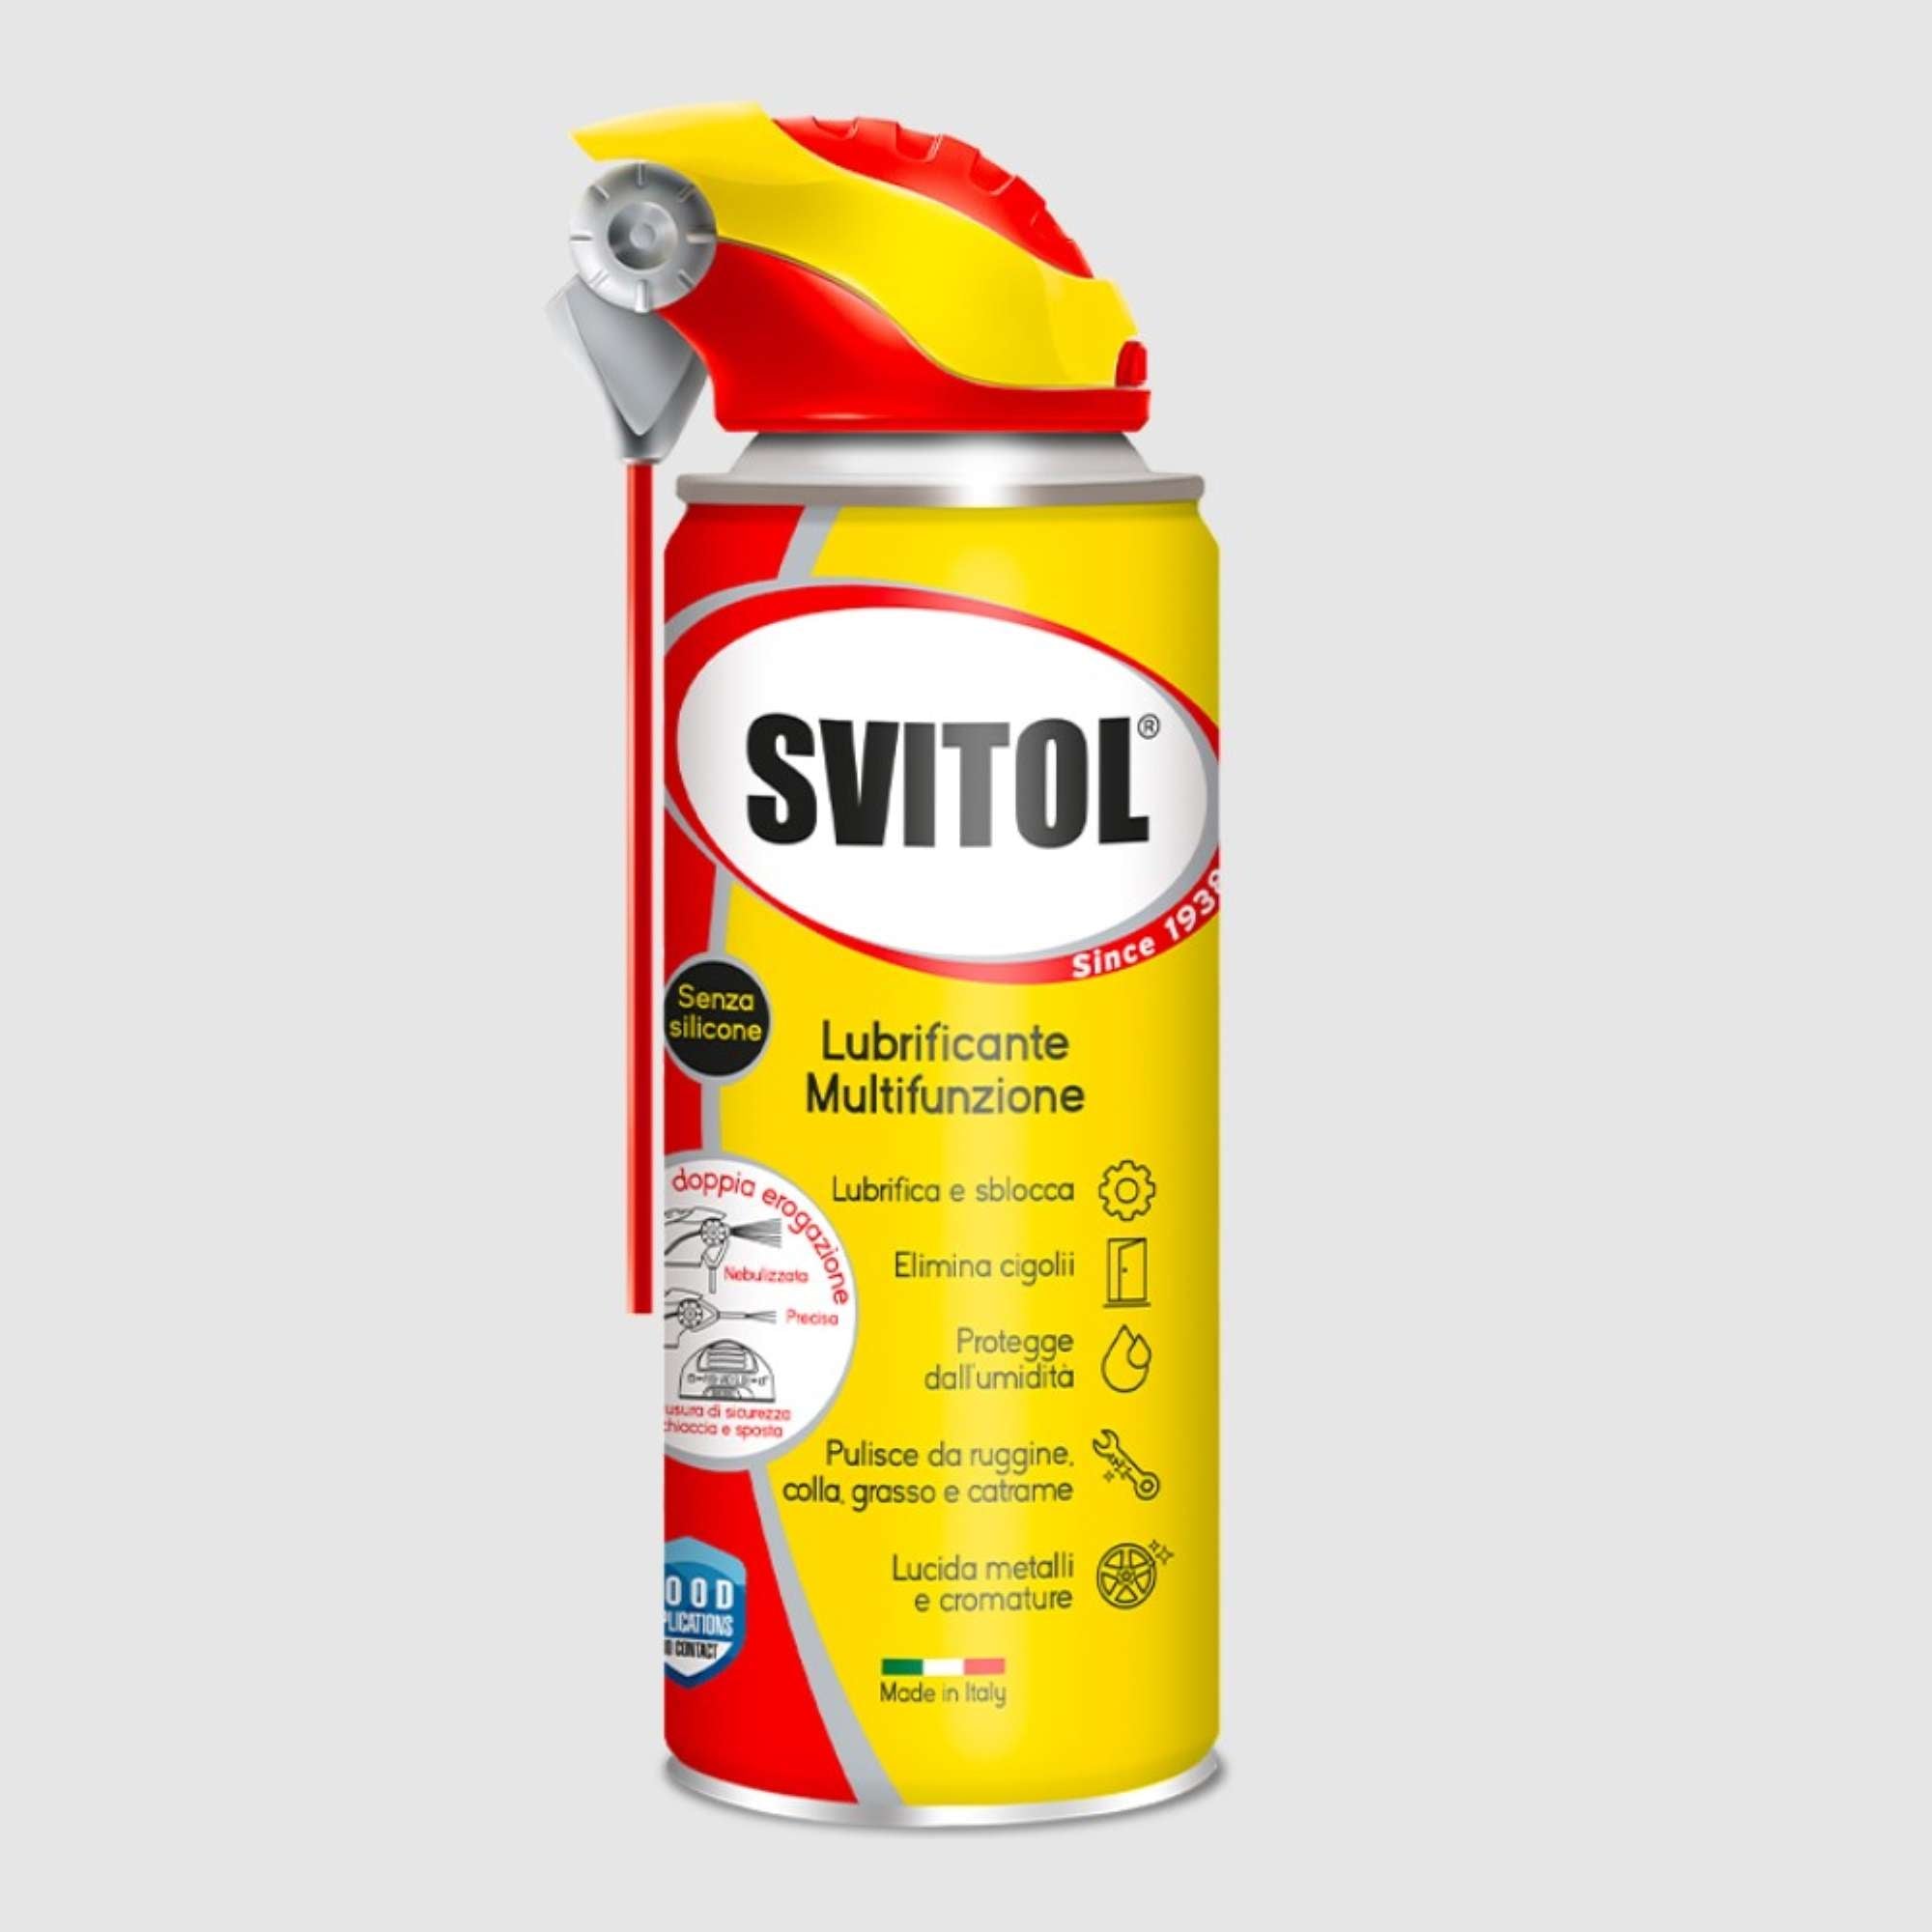 Multifunctional Lubricant Svitol - Arexons